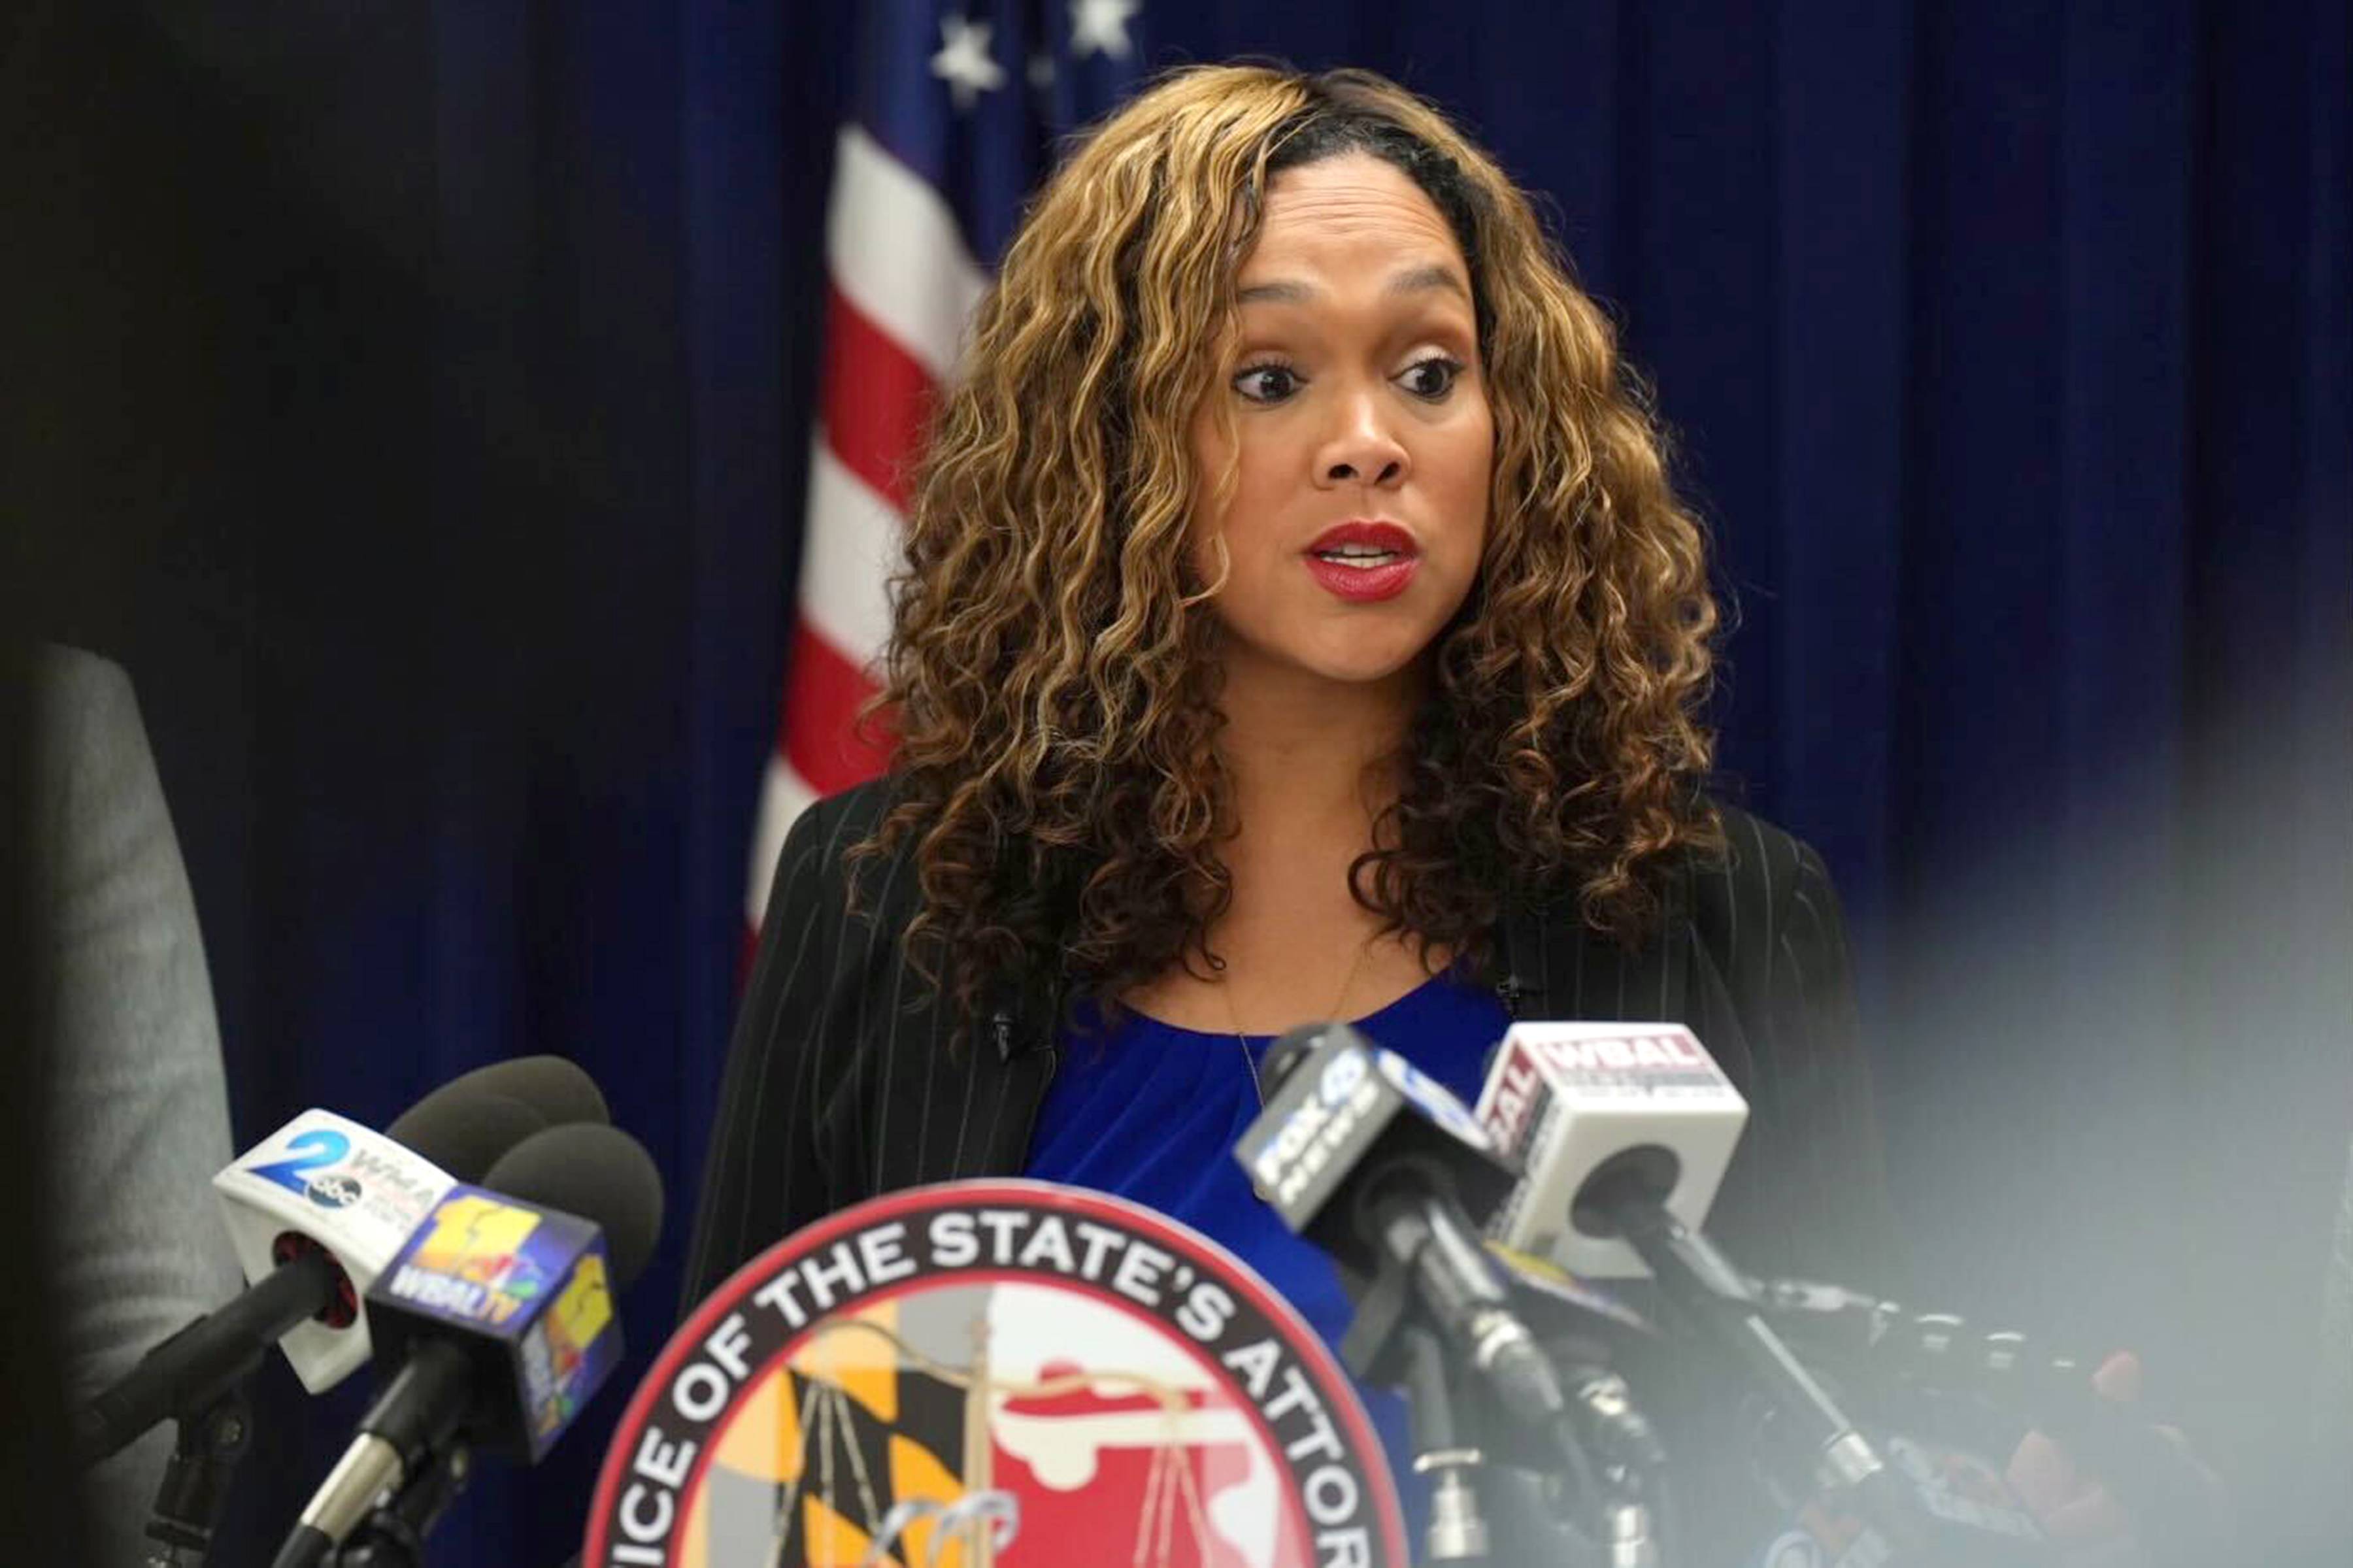 State's Attorney Marilyn Mosby will announce an update in the Adnan Syed case, including her decision to drop the charges against him